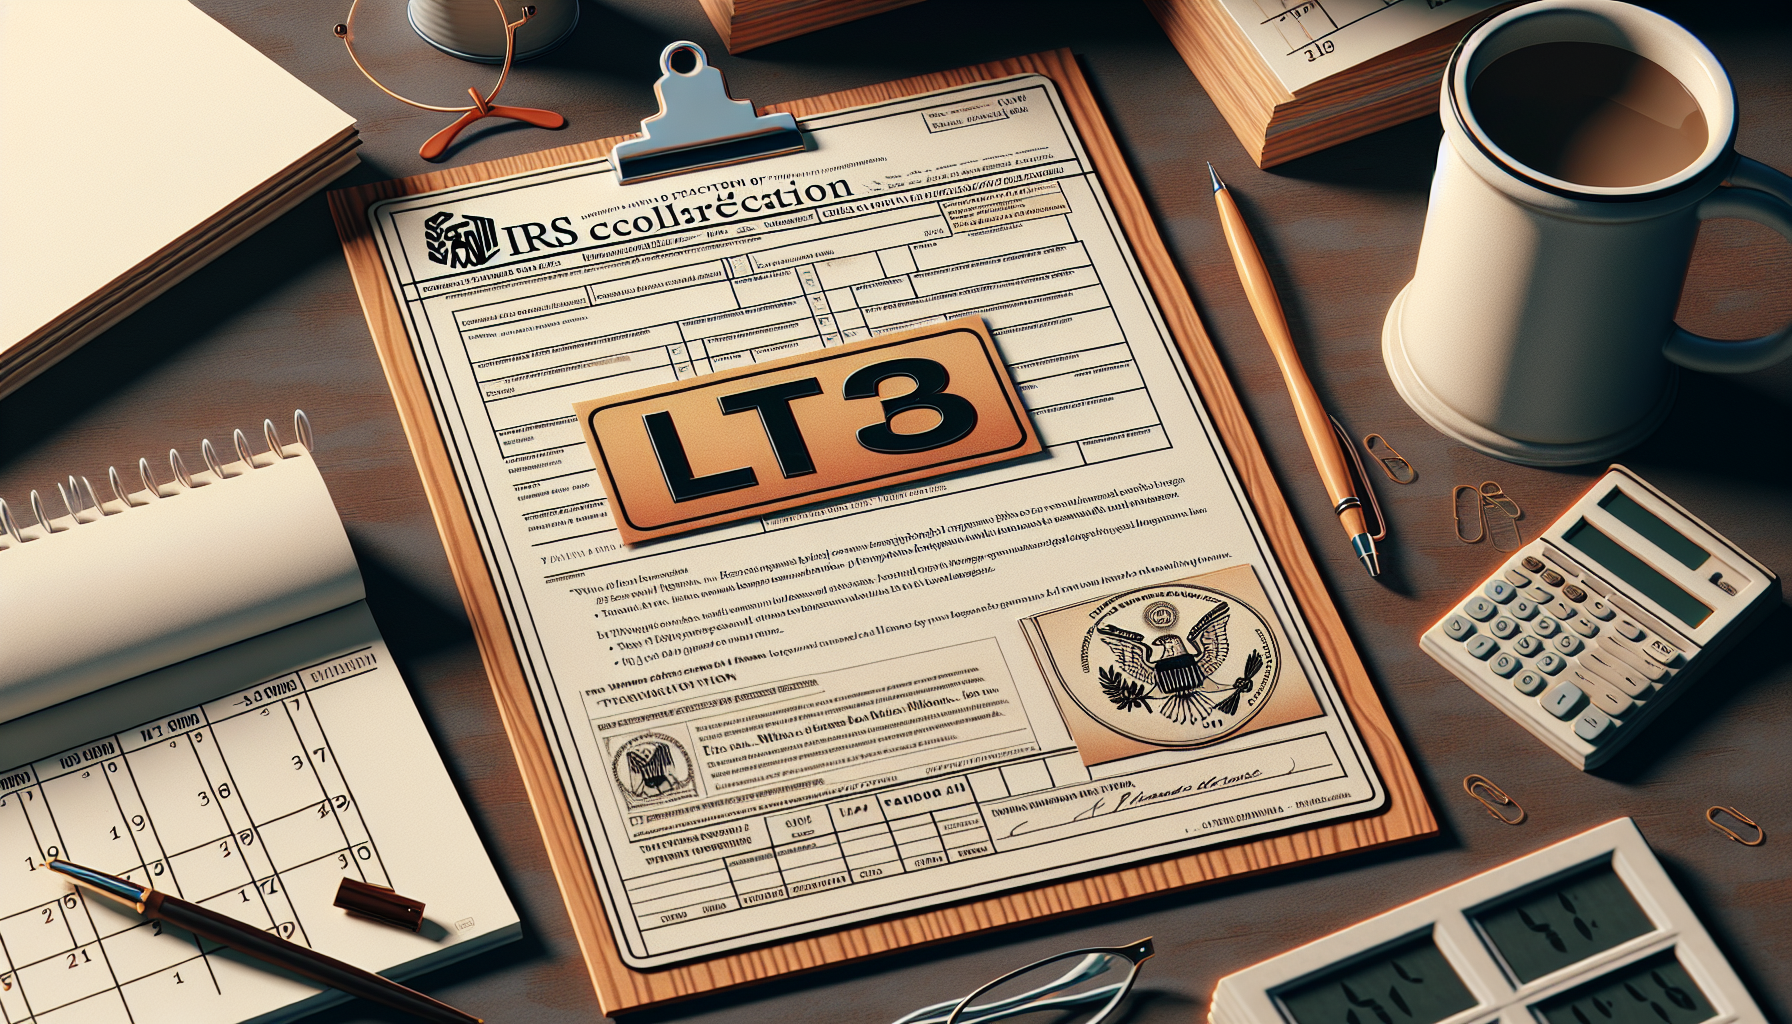 Illustration of IRS notice with LT38 label